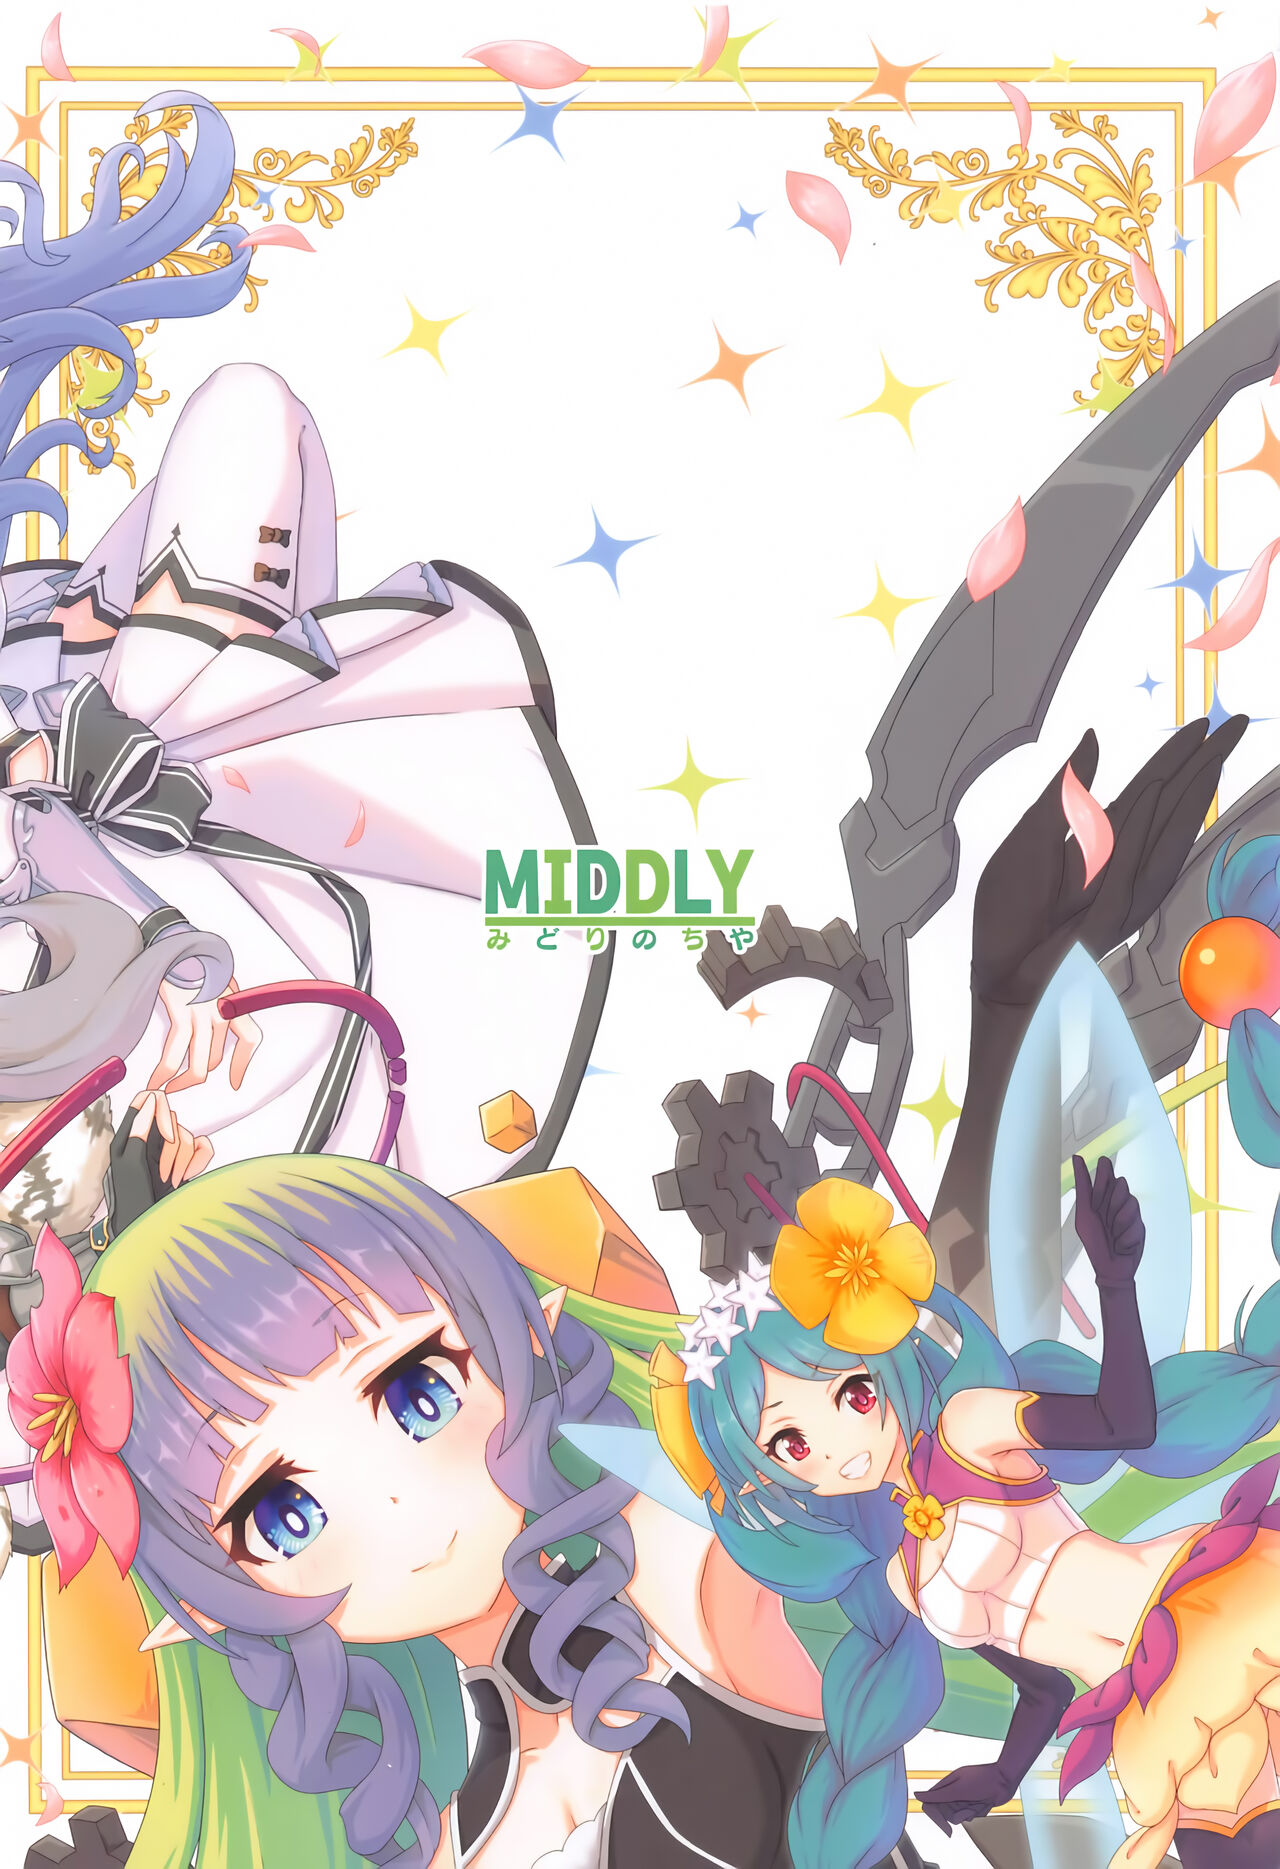 (C101) [MIDDLY (Midorinocha)] Colorful Connect 7th:Dive - Union Sisters (Princess Connect! Re:Dive) [Chinese] [黎欧出资汉化] (C101) [MIDDLY (みどりのちや)] カラフルコネクト 7th:Dive (プリンセスコネクト!Re:Dive) [中国翻訳]